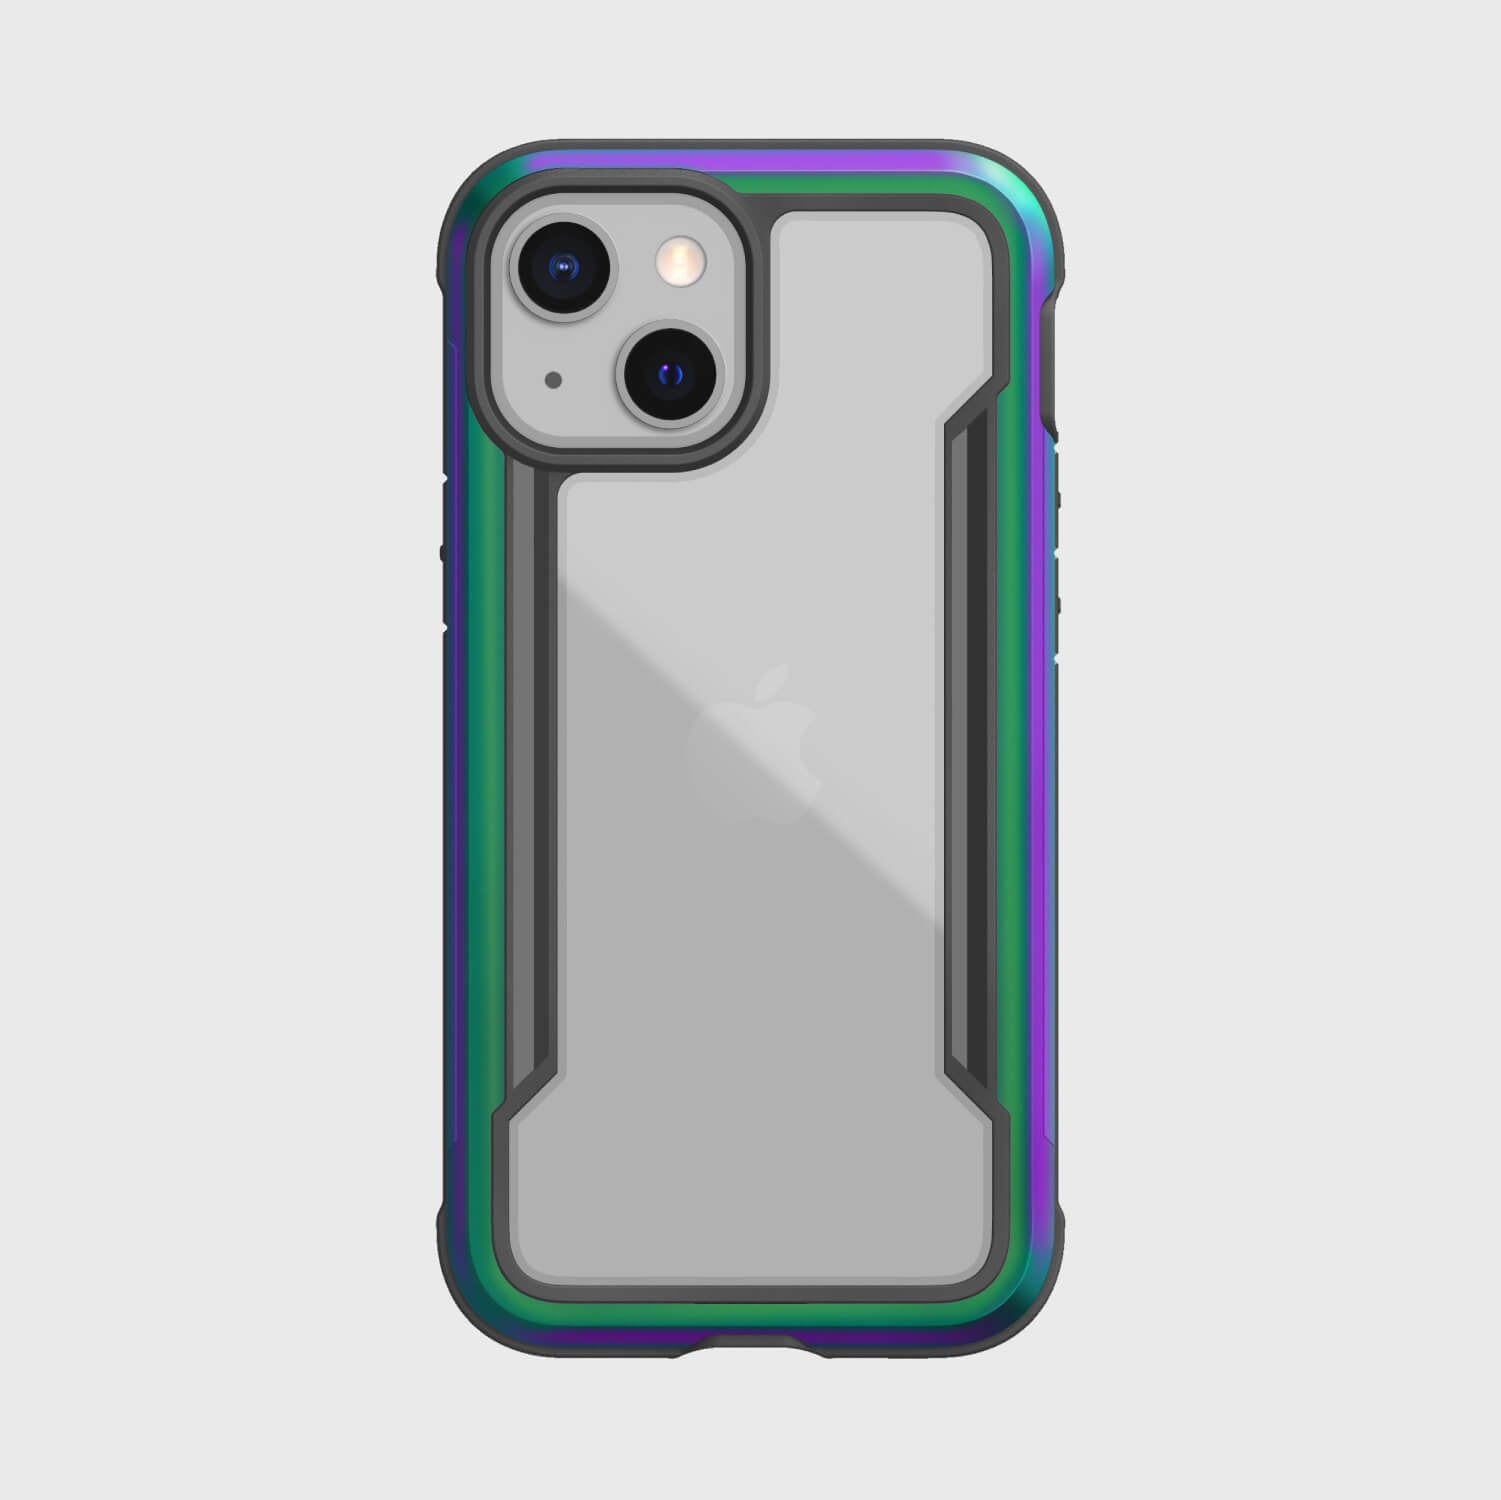 The back of an iPhone 13 Mini Case - SHIELD PRO by Raptic with a purple, green, and blue color.